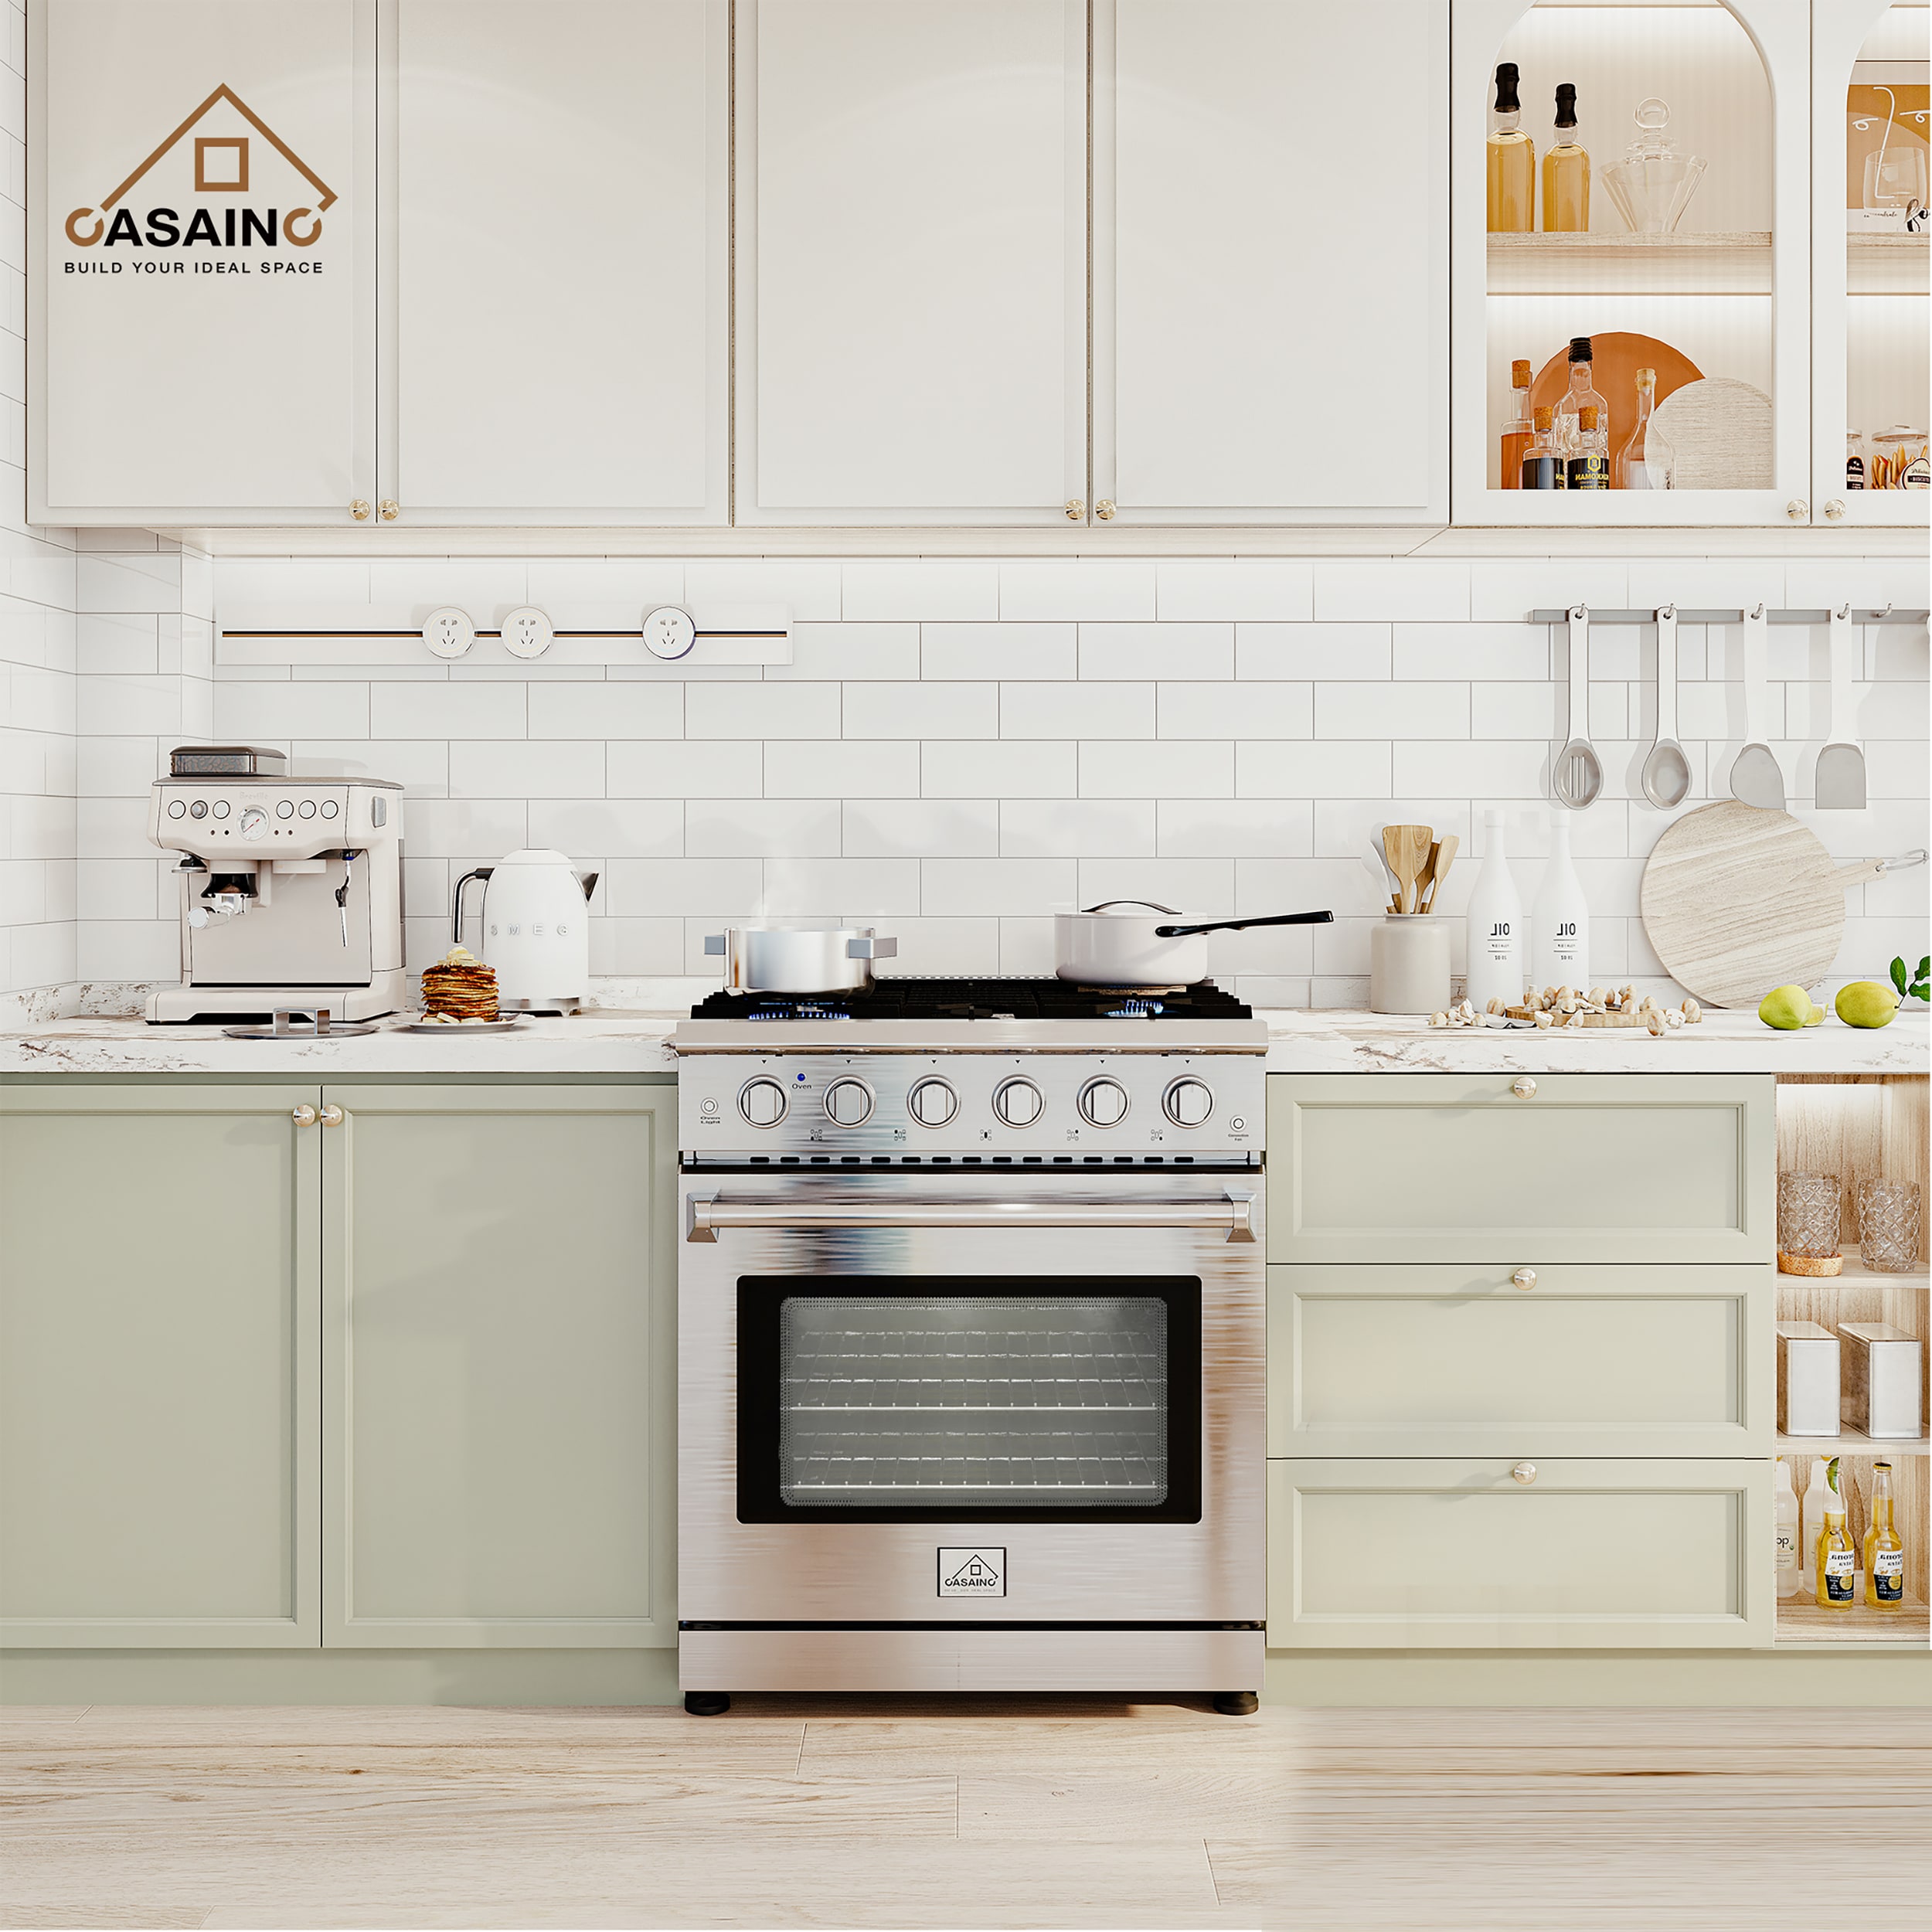 Cream kitchen with high-end viking stove and range hood;Victoria